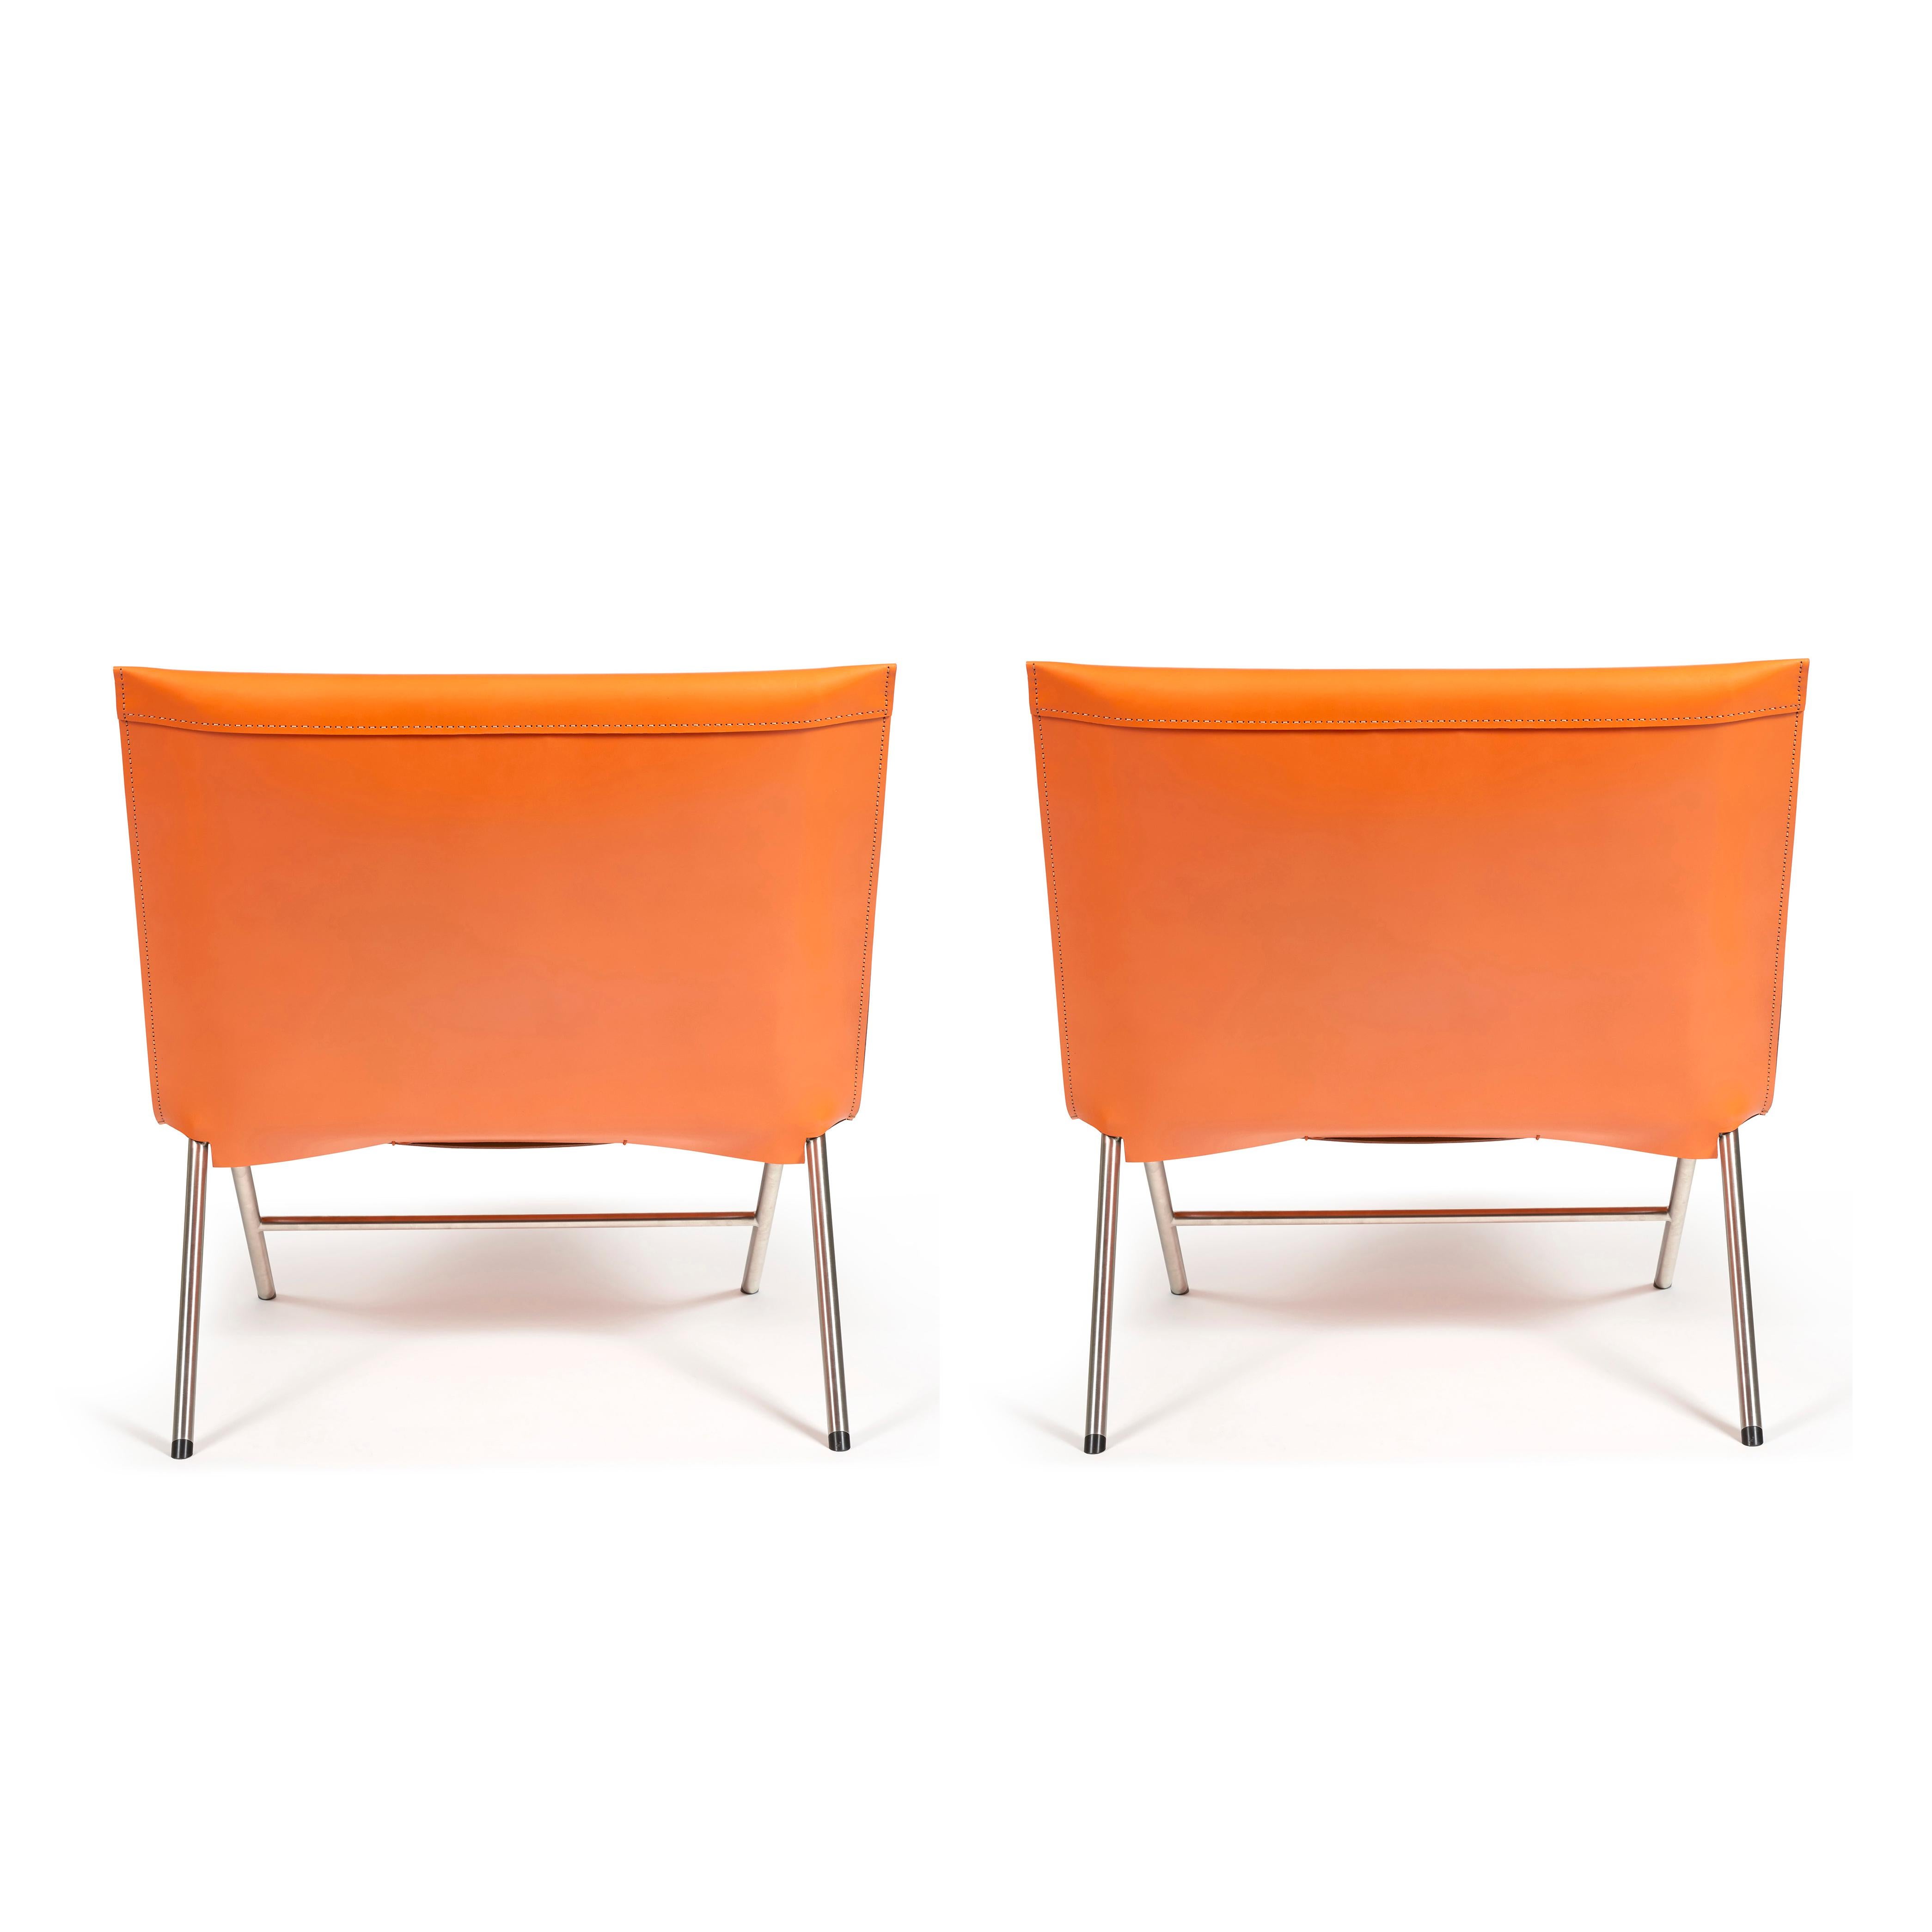 Modern Gioia Meller-Marcovicz, Recline, Pair of Lounge Chairs For Sale